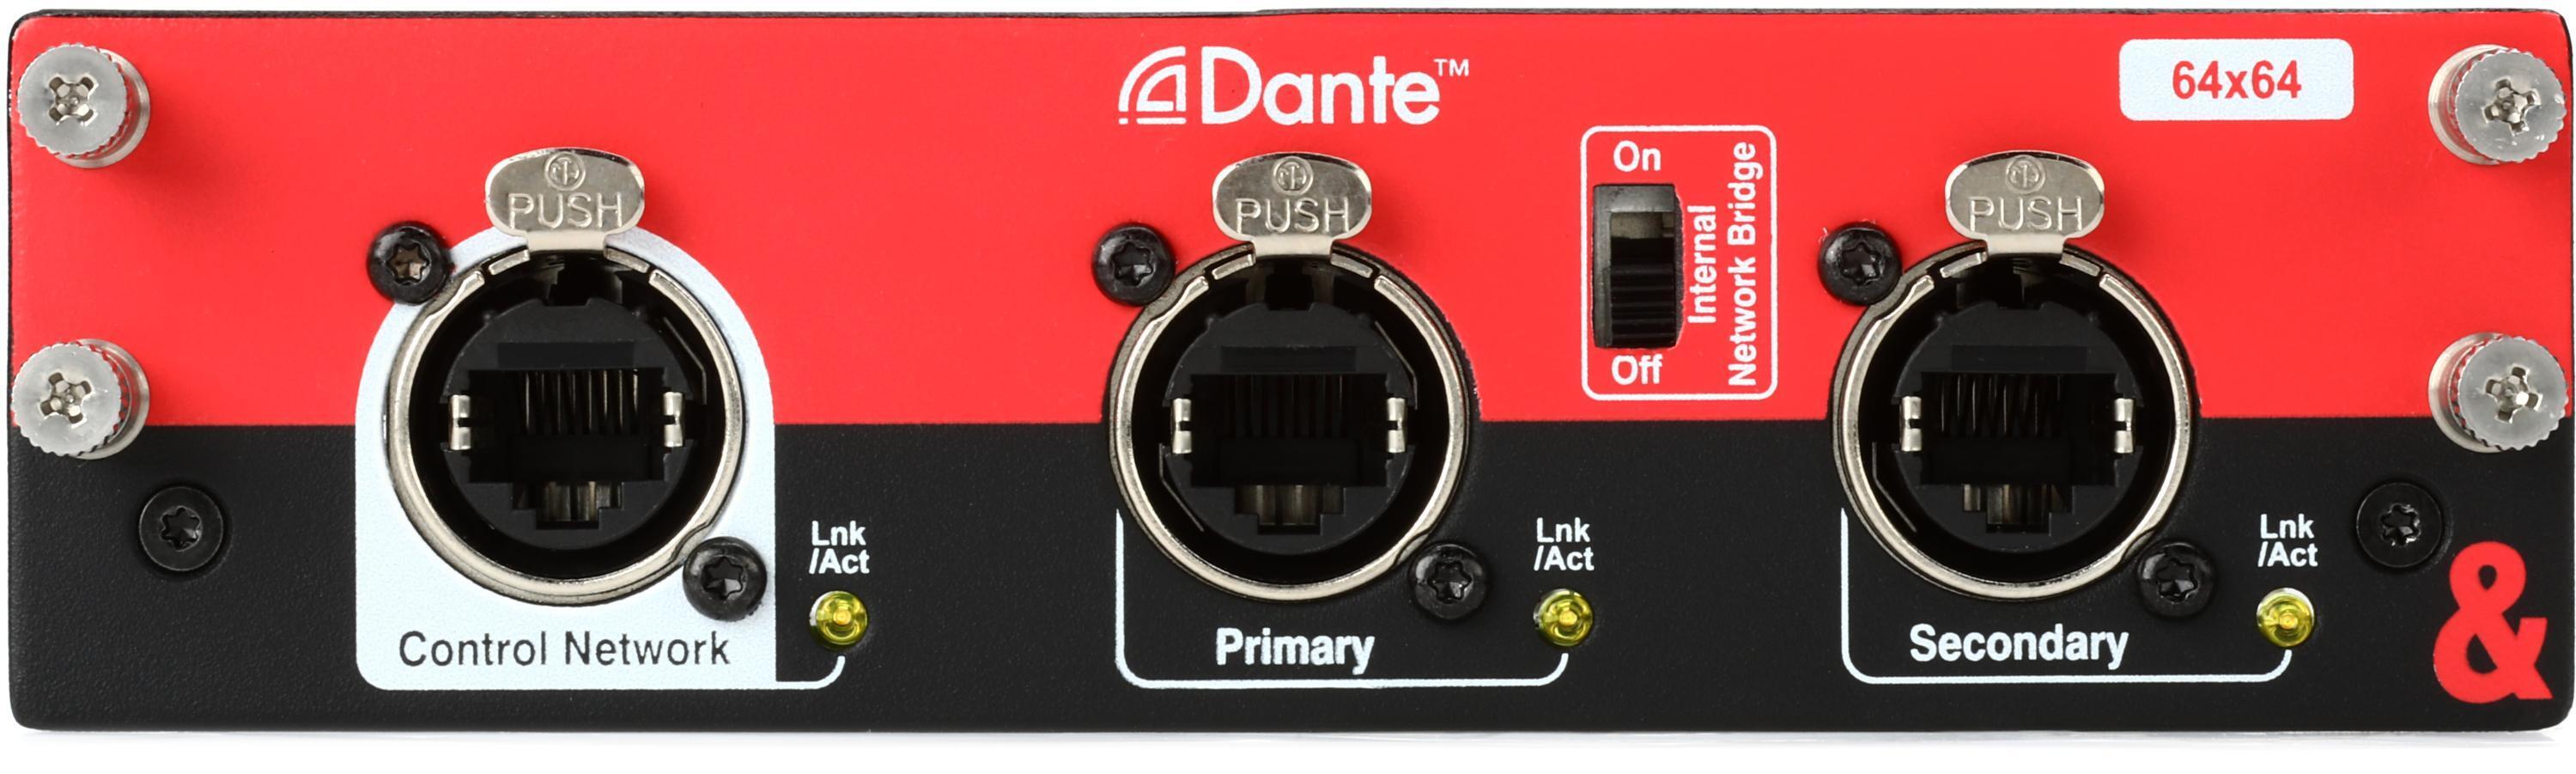 Yamaha DANTE-MY16-AUD2 16-channel Dante Network I/O Card | Sweetwater